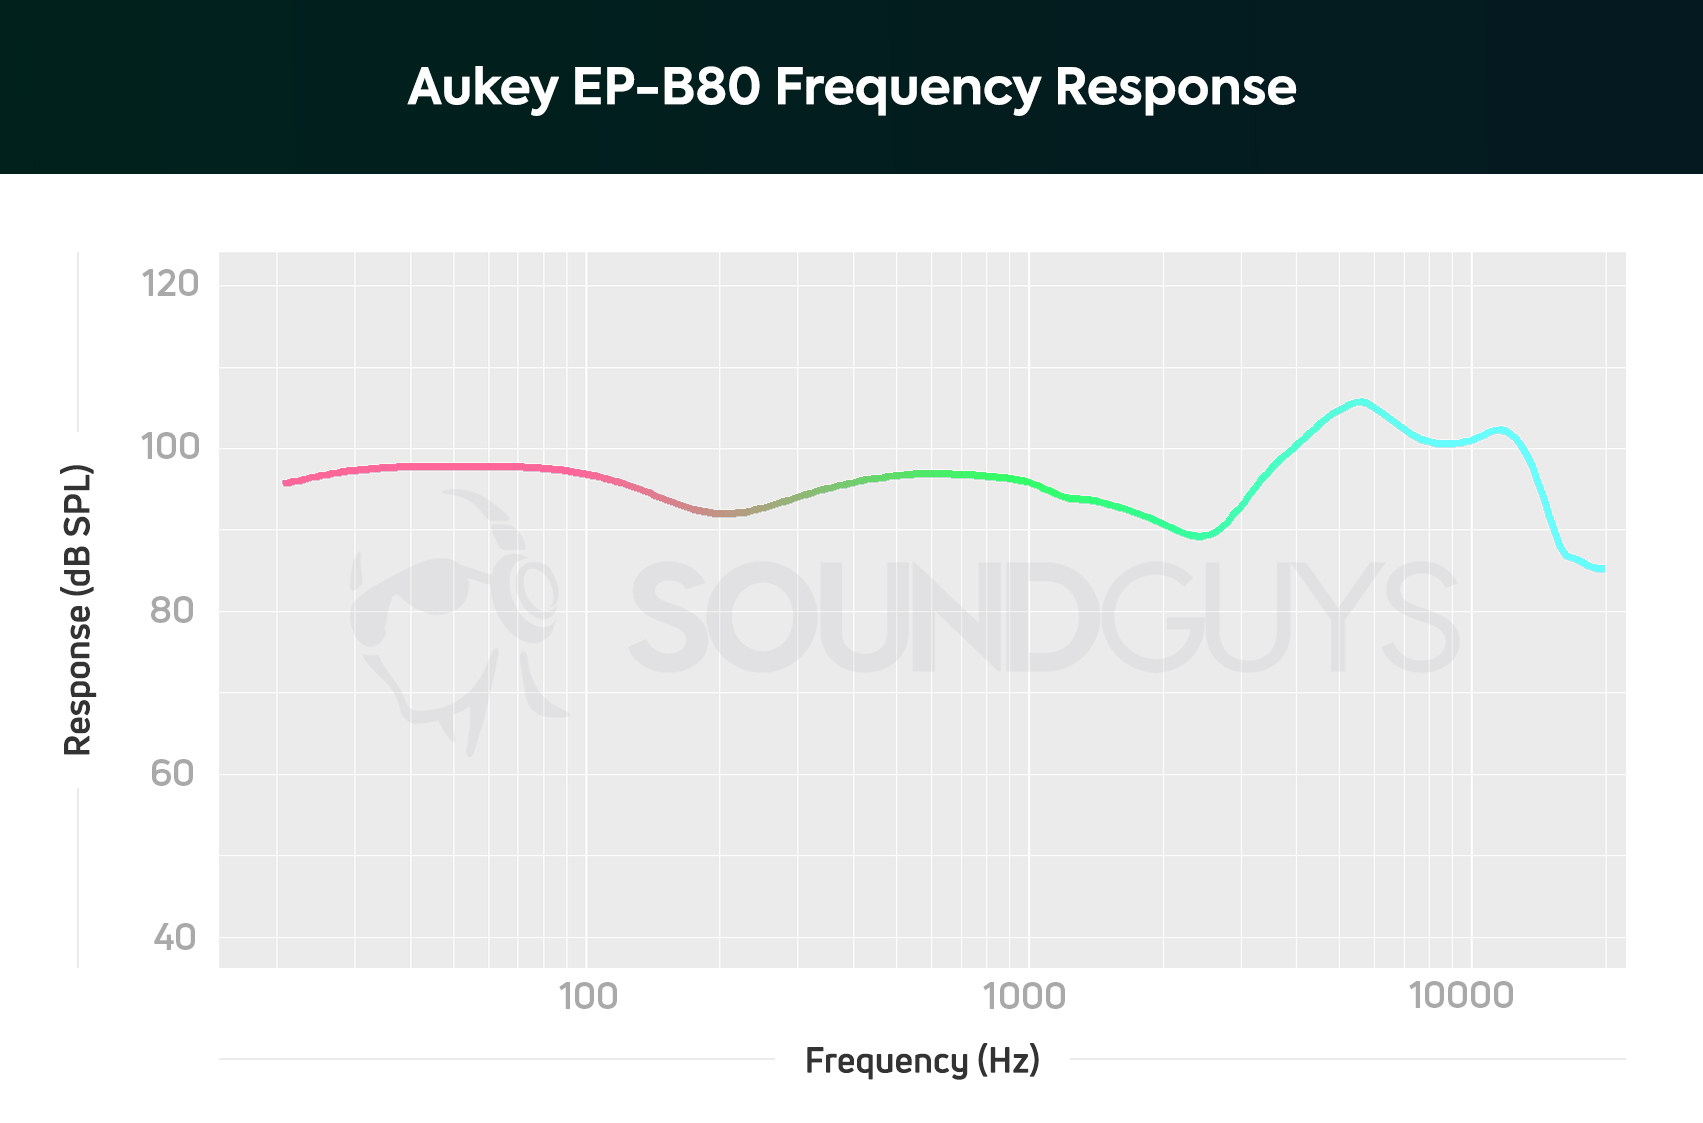 Aukey EP-B80: Frequency response chart depicts boosted treble frequencies.